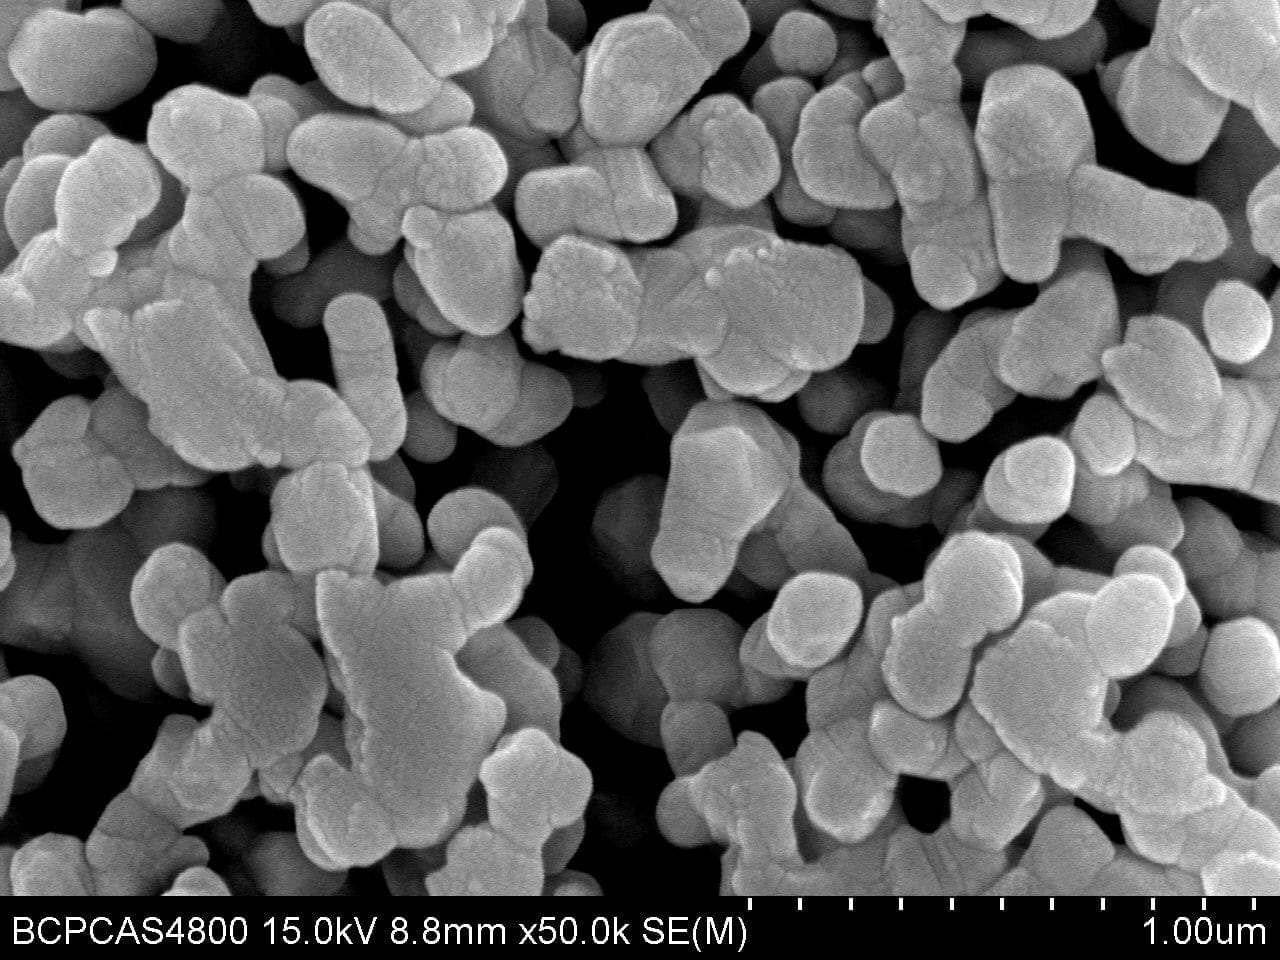 Study concludes that silver nanoparticles are toxic for aquatic organisms